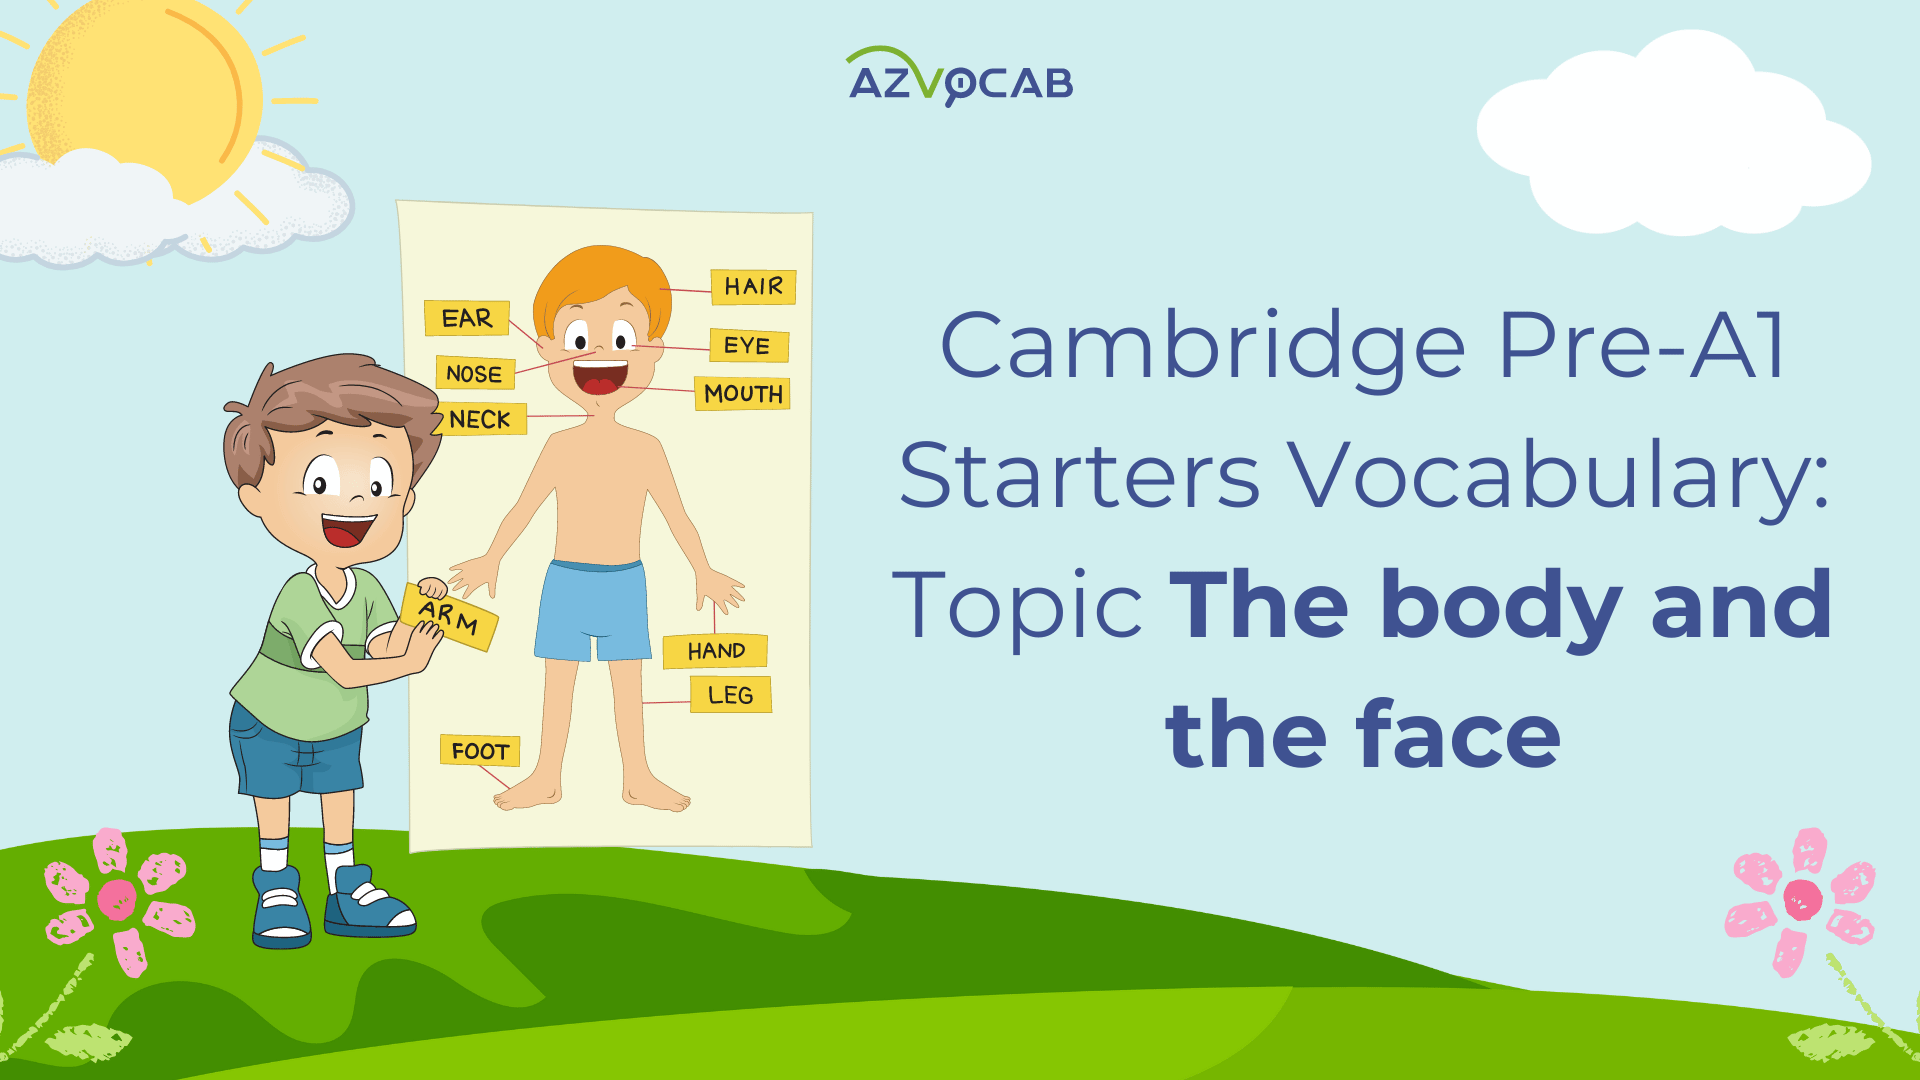 Starters Vocabulary The body and the face